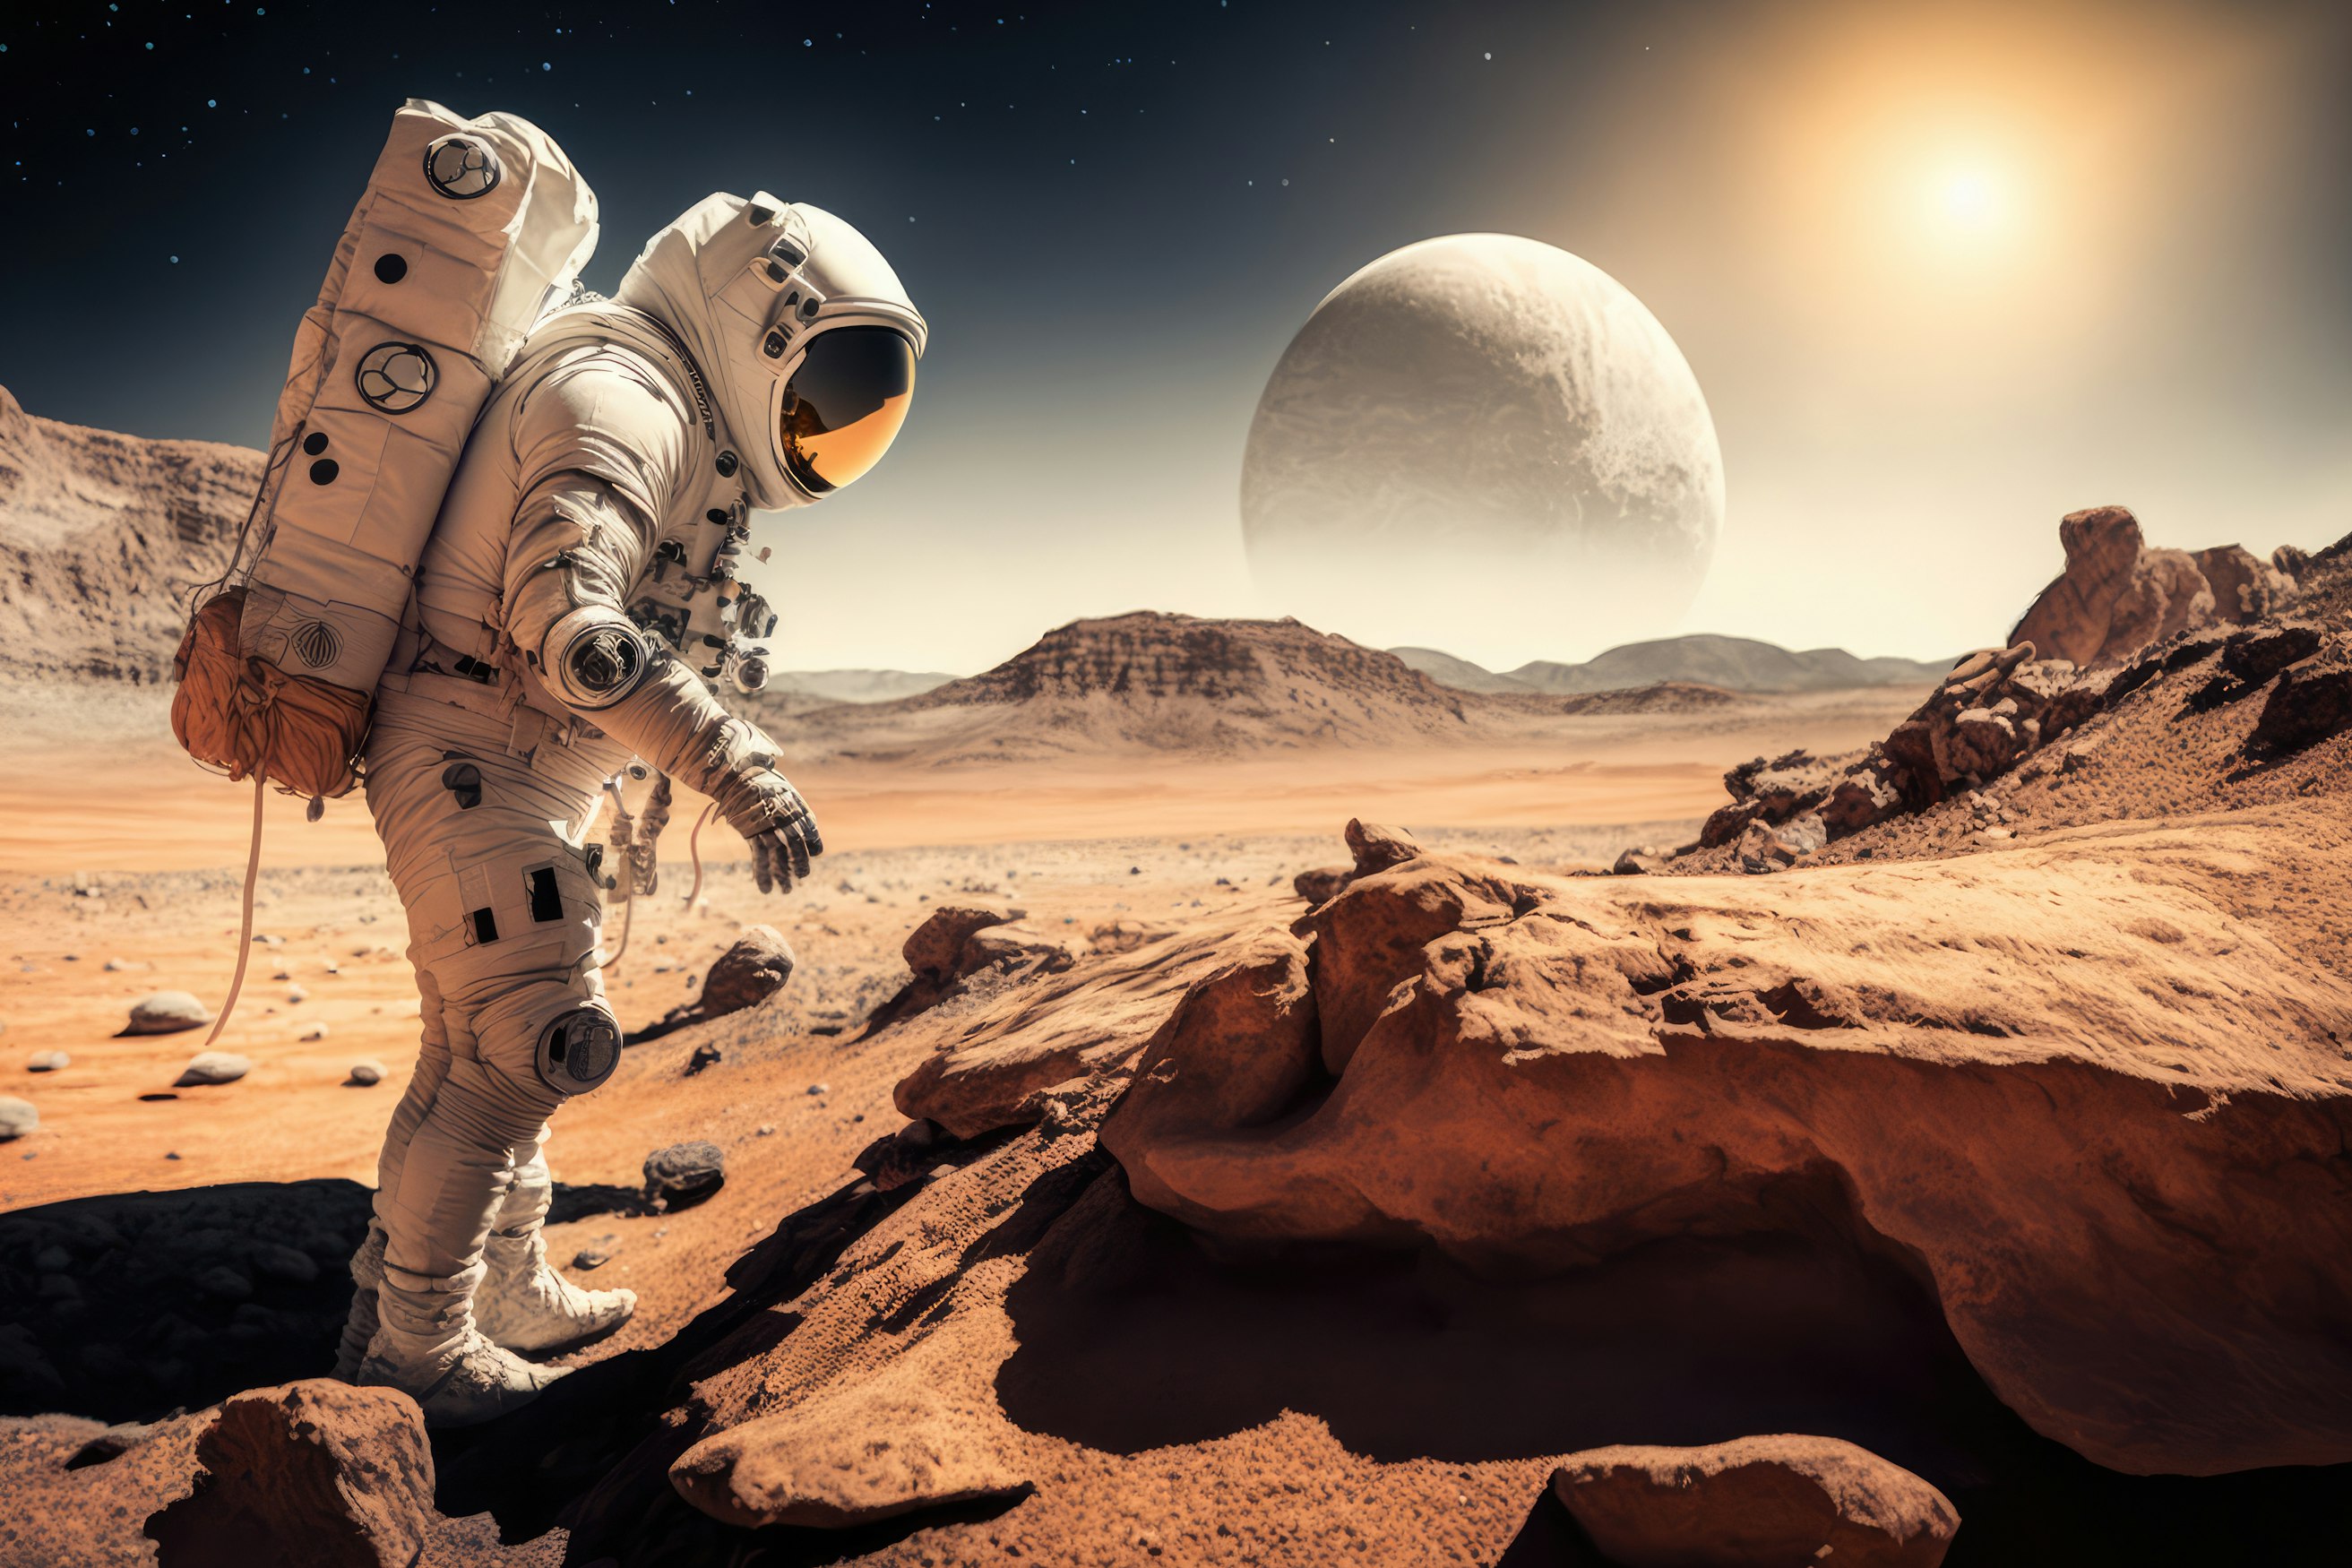 Astronaut spaceman collecting rock samples on a distant planet